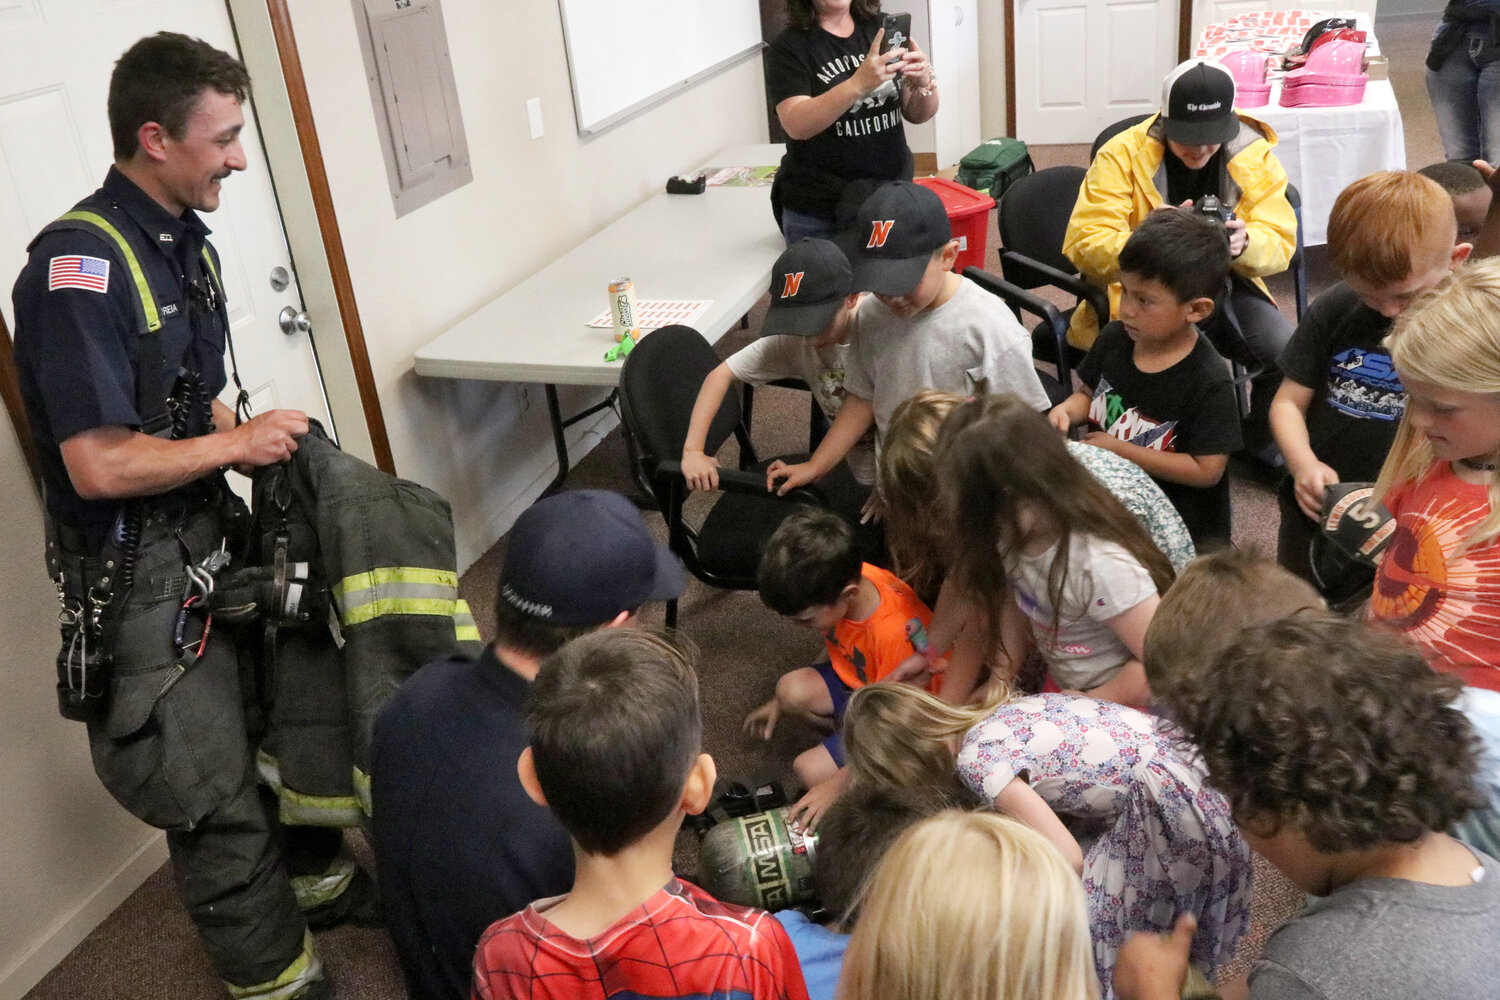 Kids crowd to get a closer look at a firefighter’s gear inside the Lewis County Fire District 5 station in Napavine on Tuesday, June 6.